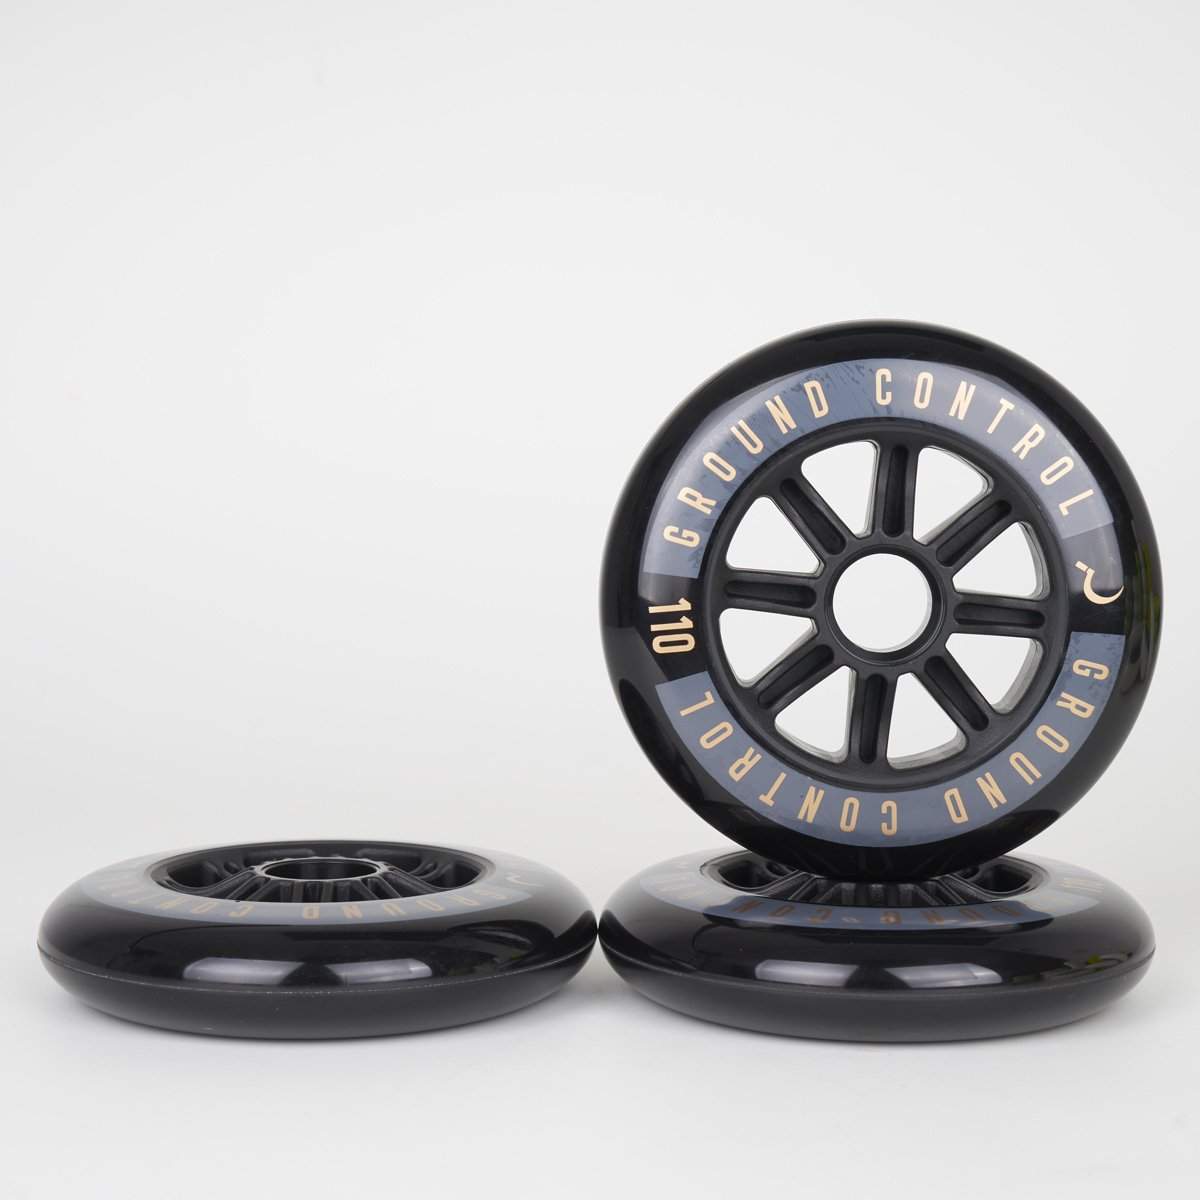 Ground Control 110mm Black / Gold Wheels  - 3 Pack